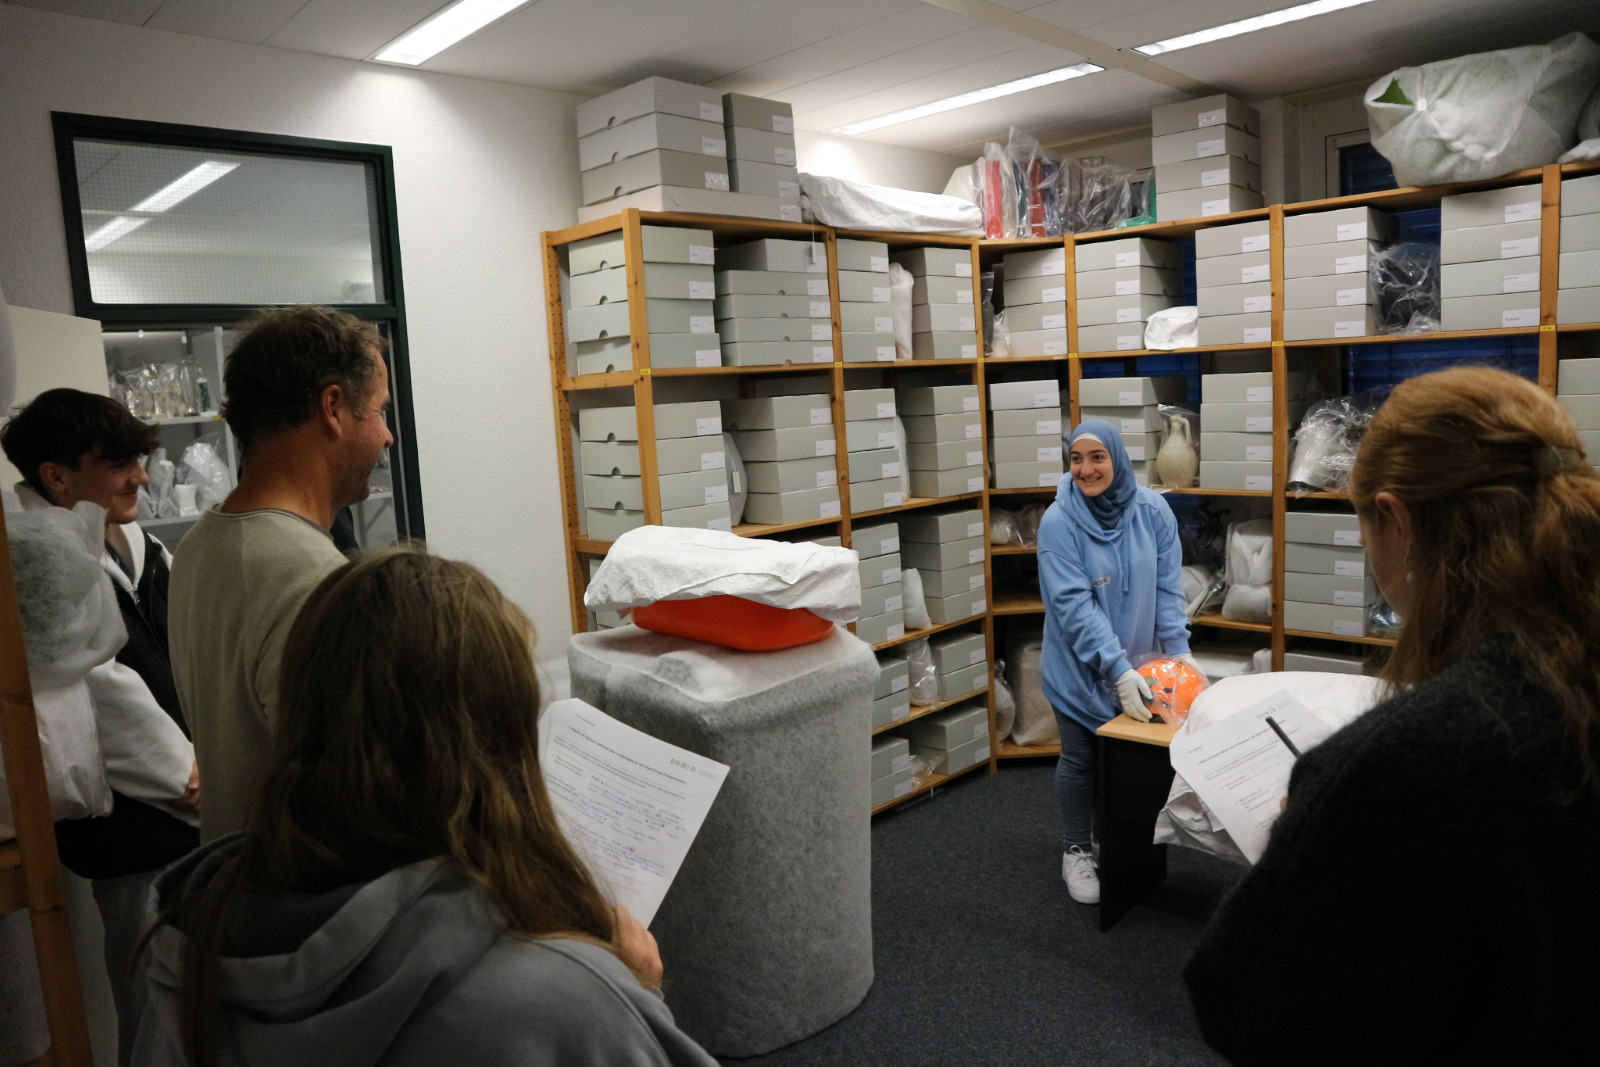 The students introduce each other to the DOMiD archive. Photo: DOMiD Archive Cologne